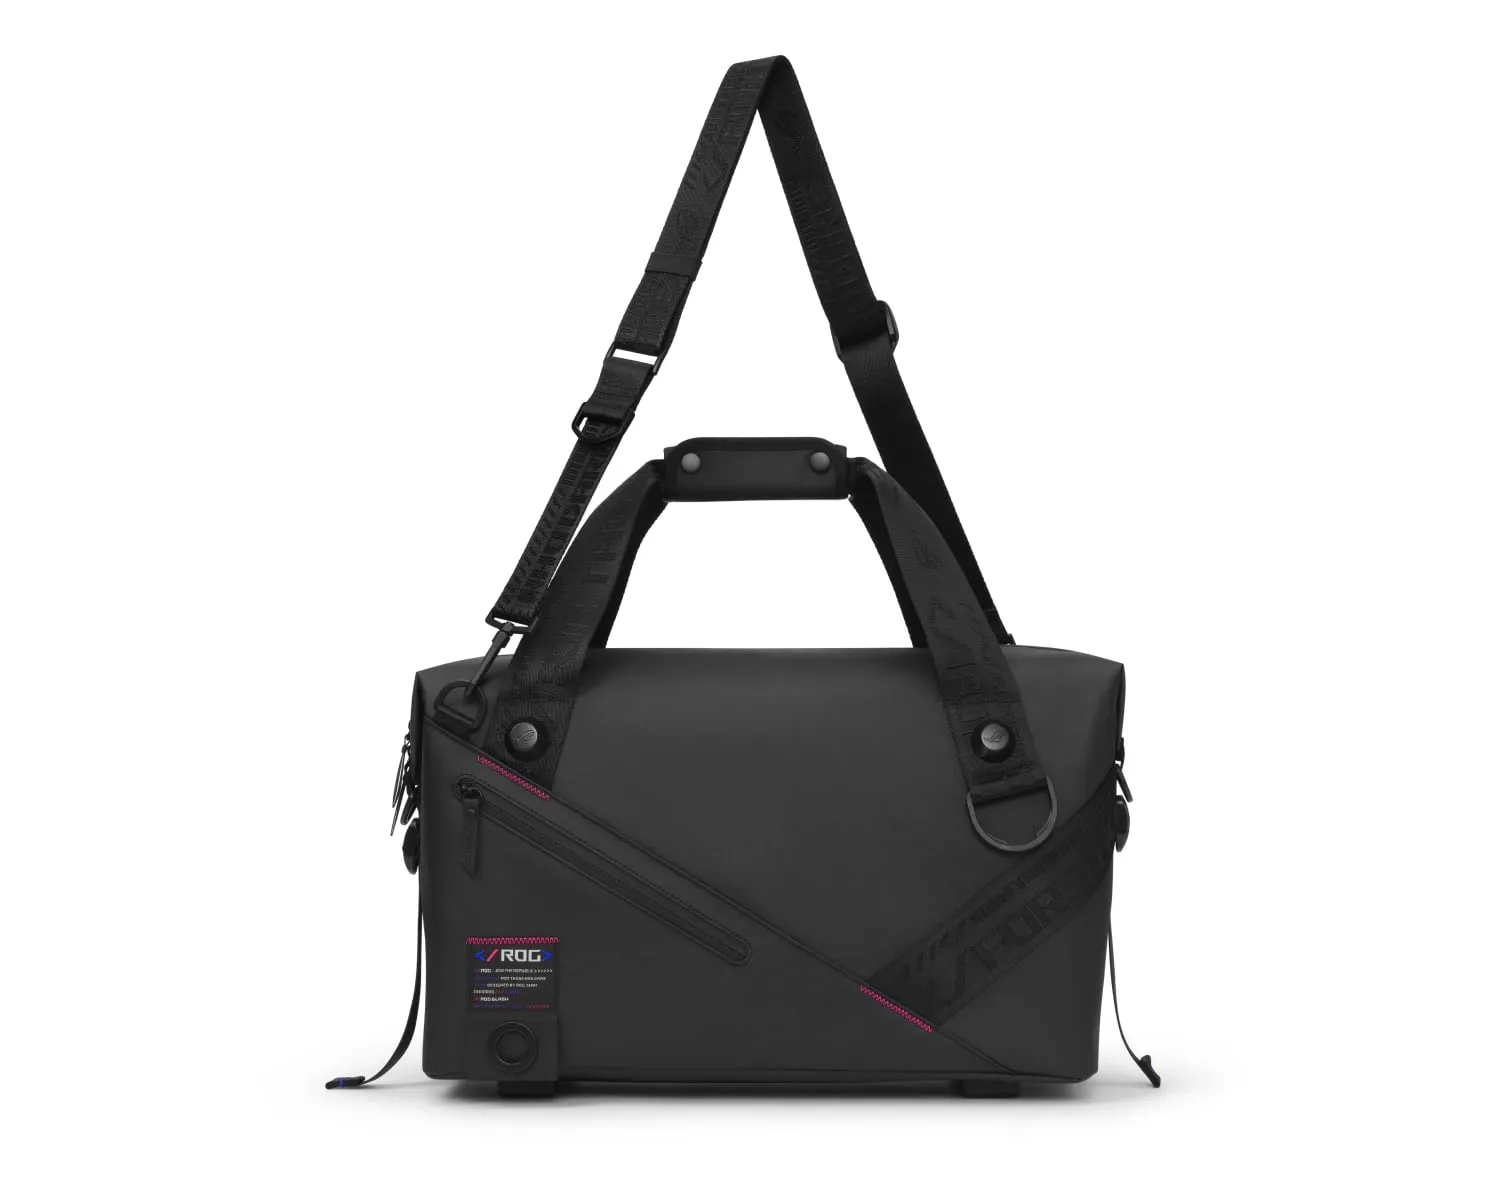 The ROG SLASH Duffle Bag, with both the hand carry handle and shoulder strap fully extended